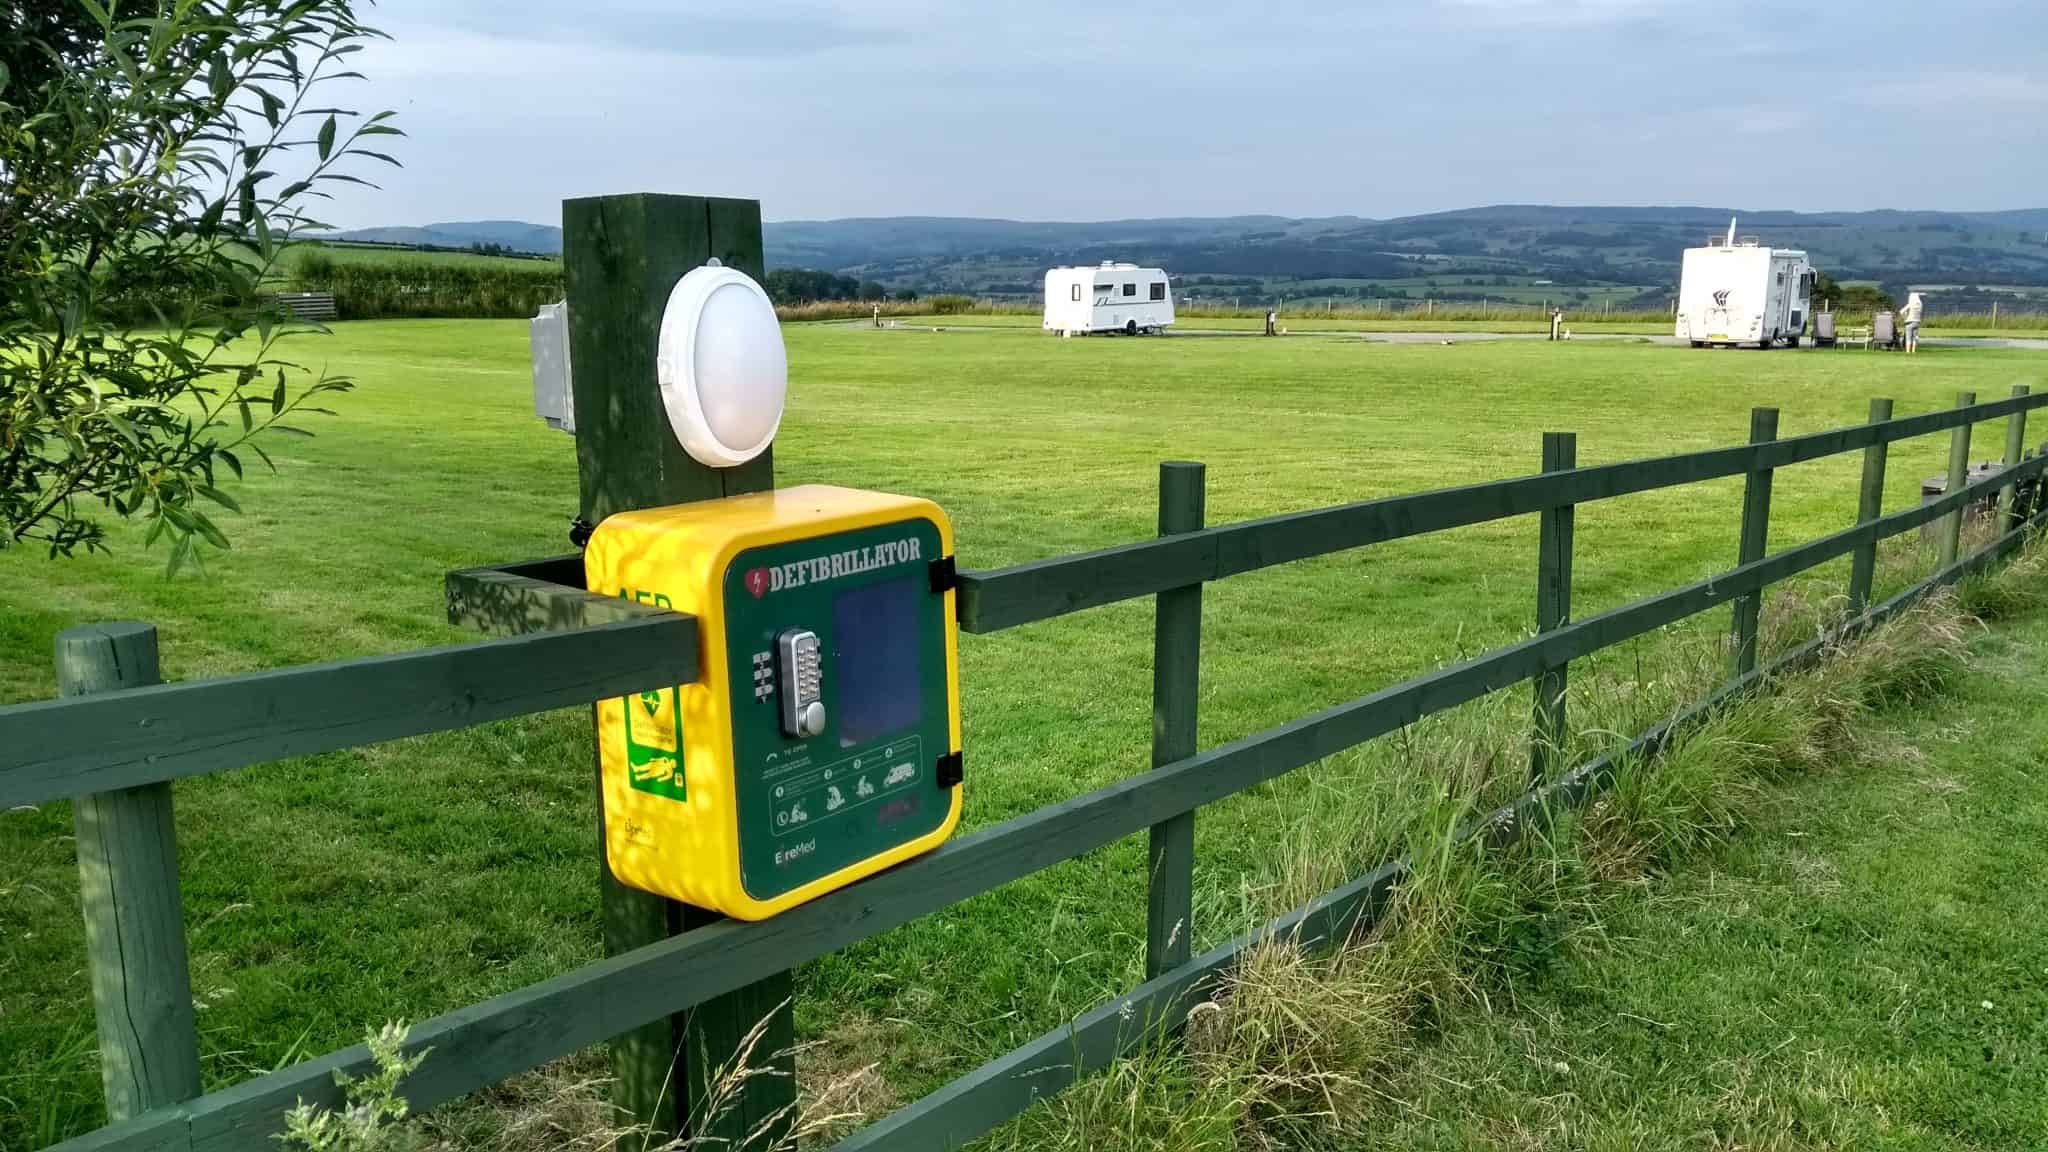 When they are used, public access defibrillators save lives. Why aren’t there more public access defibrillators, and is there an alternative?